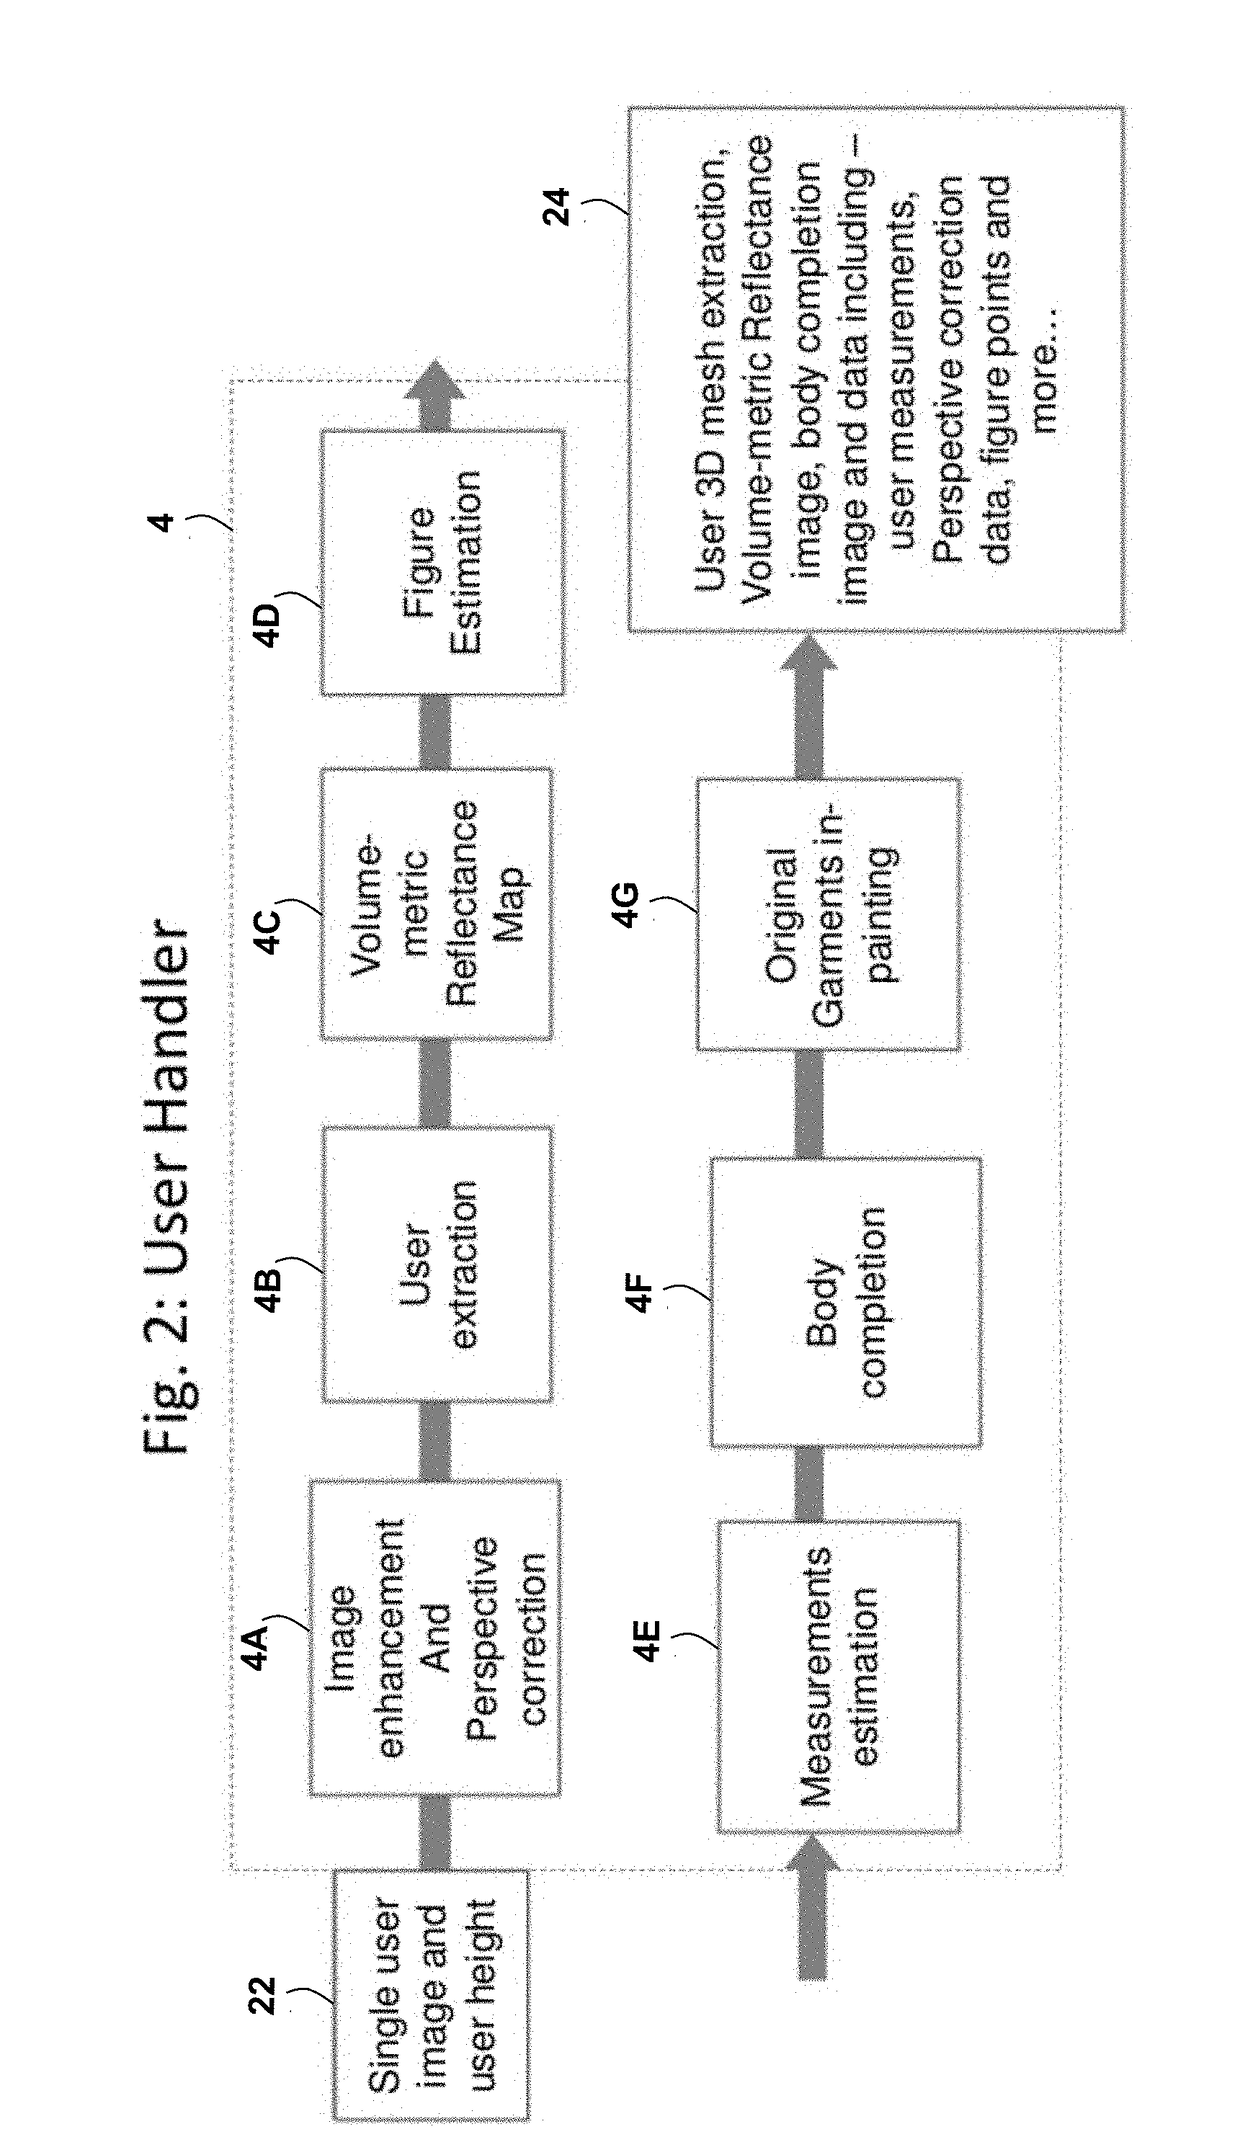 Processing User Selectable Product Images And Facilitating Visualization-Assisted Coordinated Product Transactions